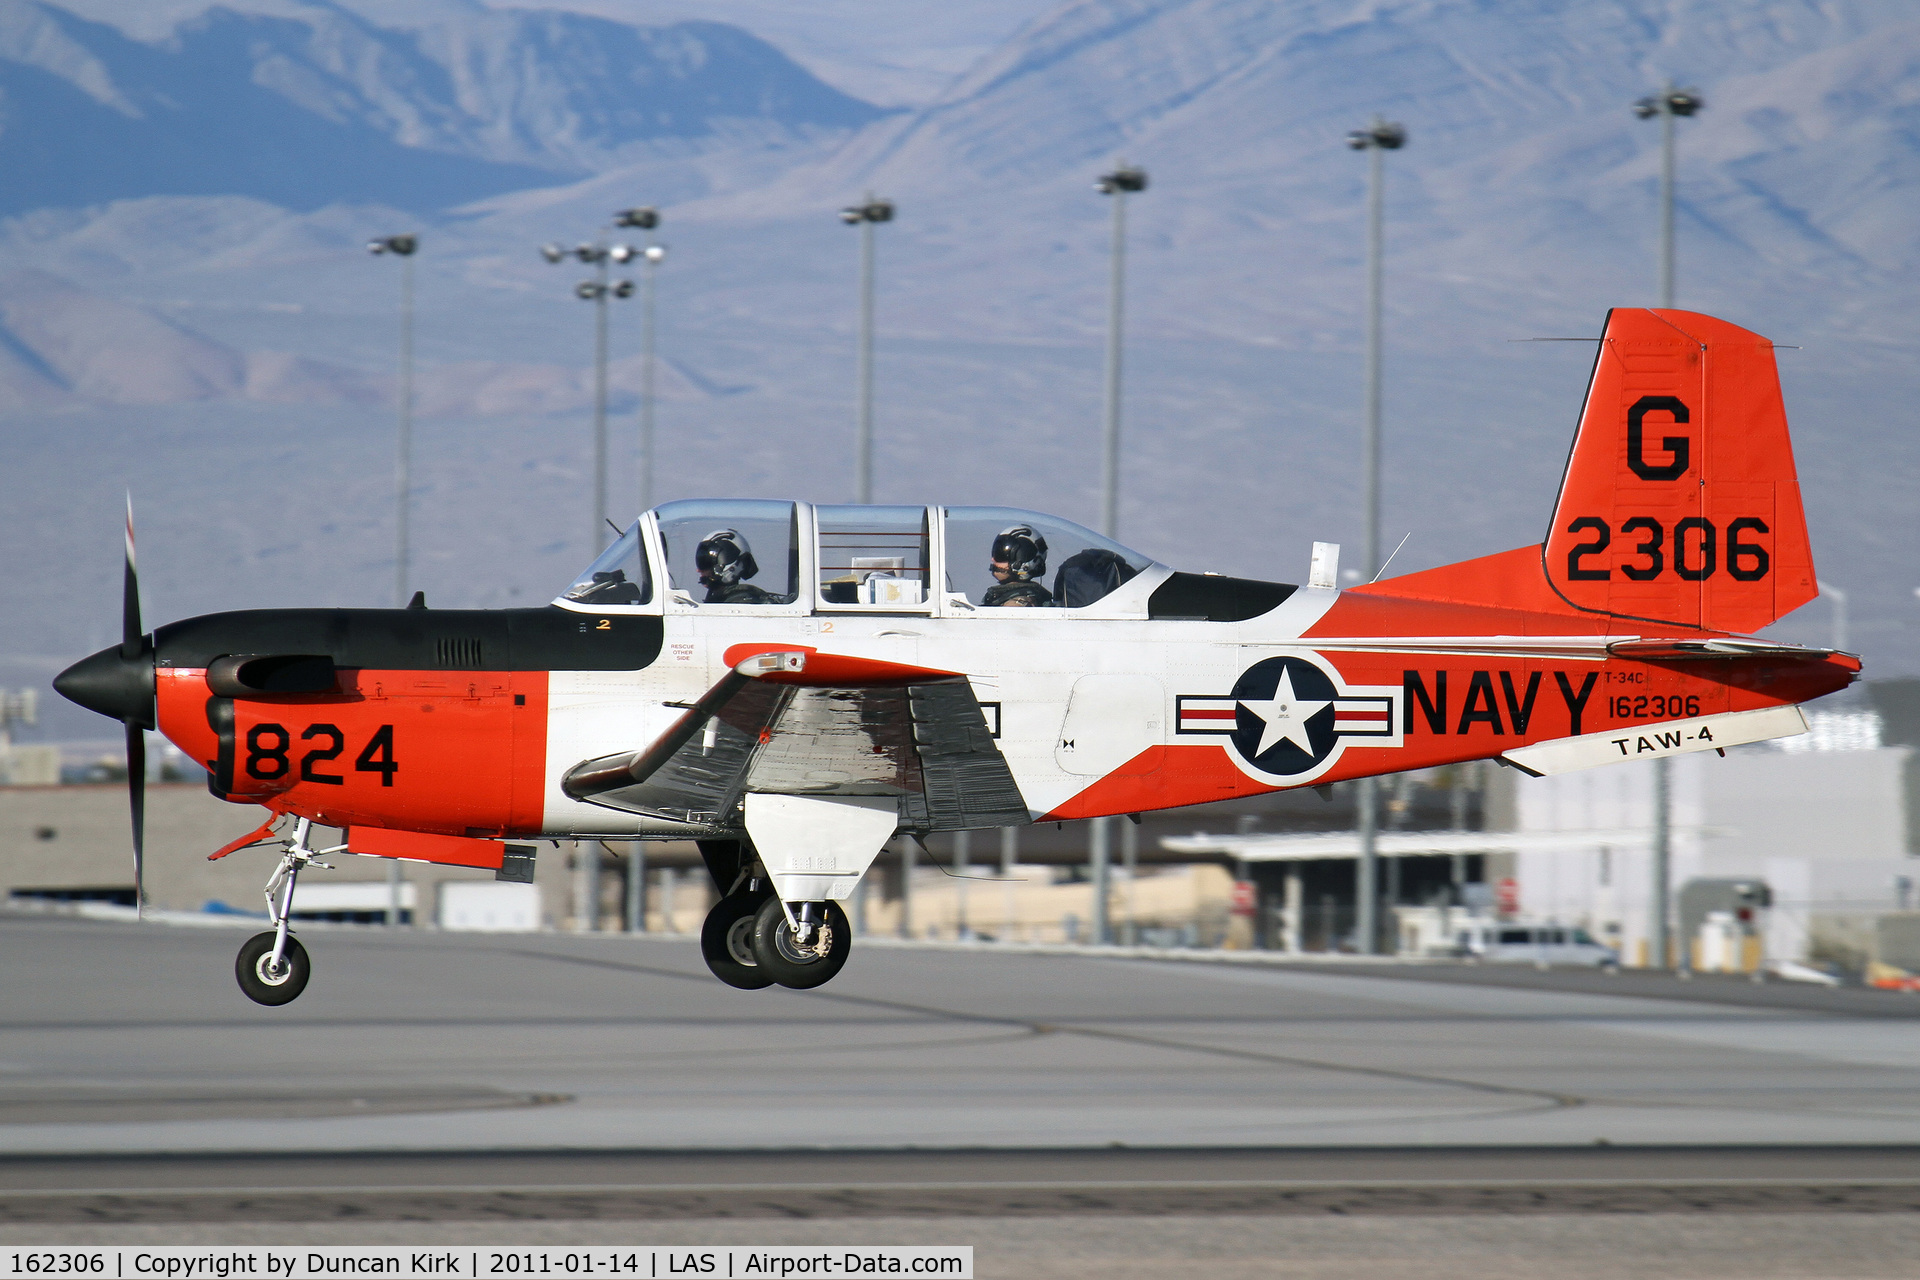 162306, Beech T-34C Turbo Mentor C/N GL-304, It was a Navy day with much presence